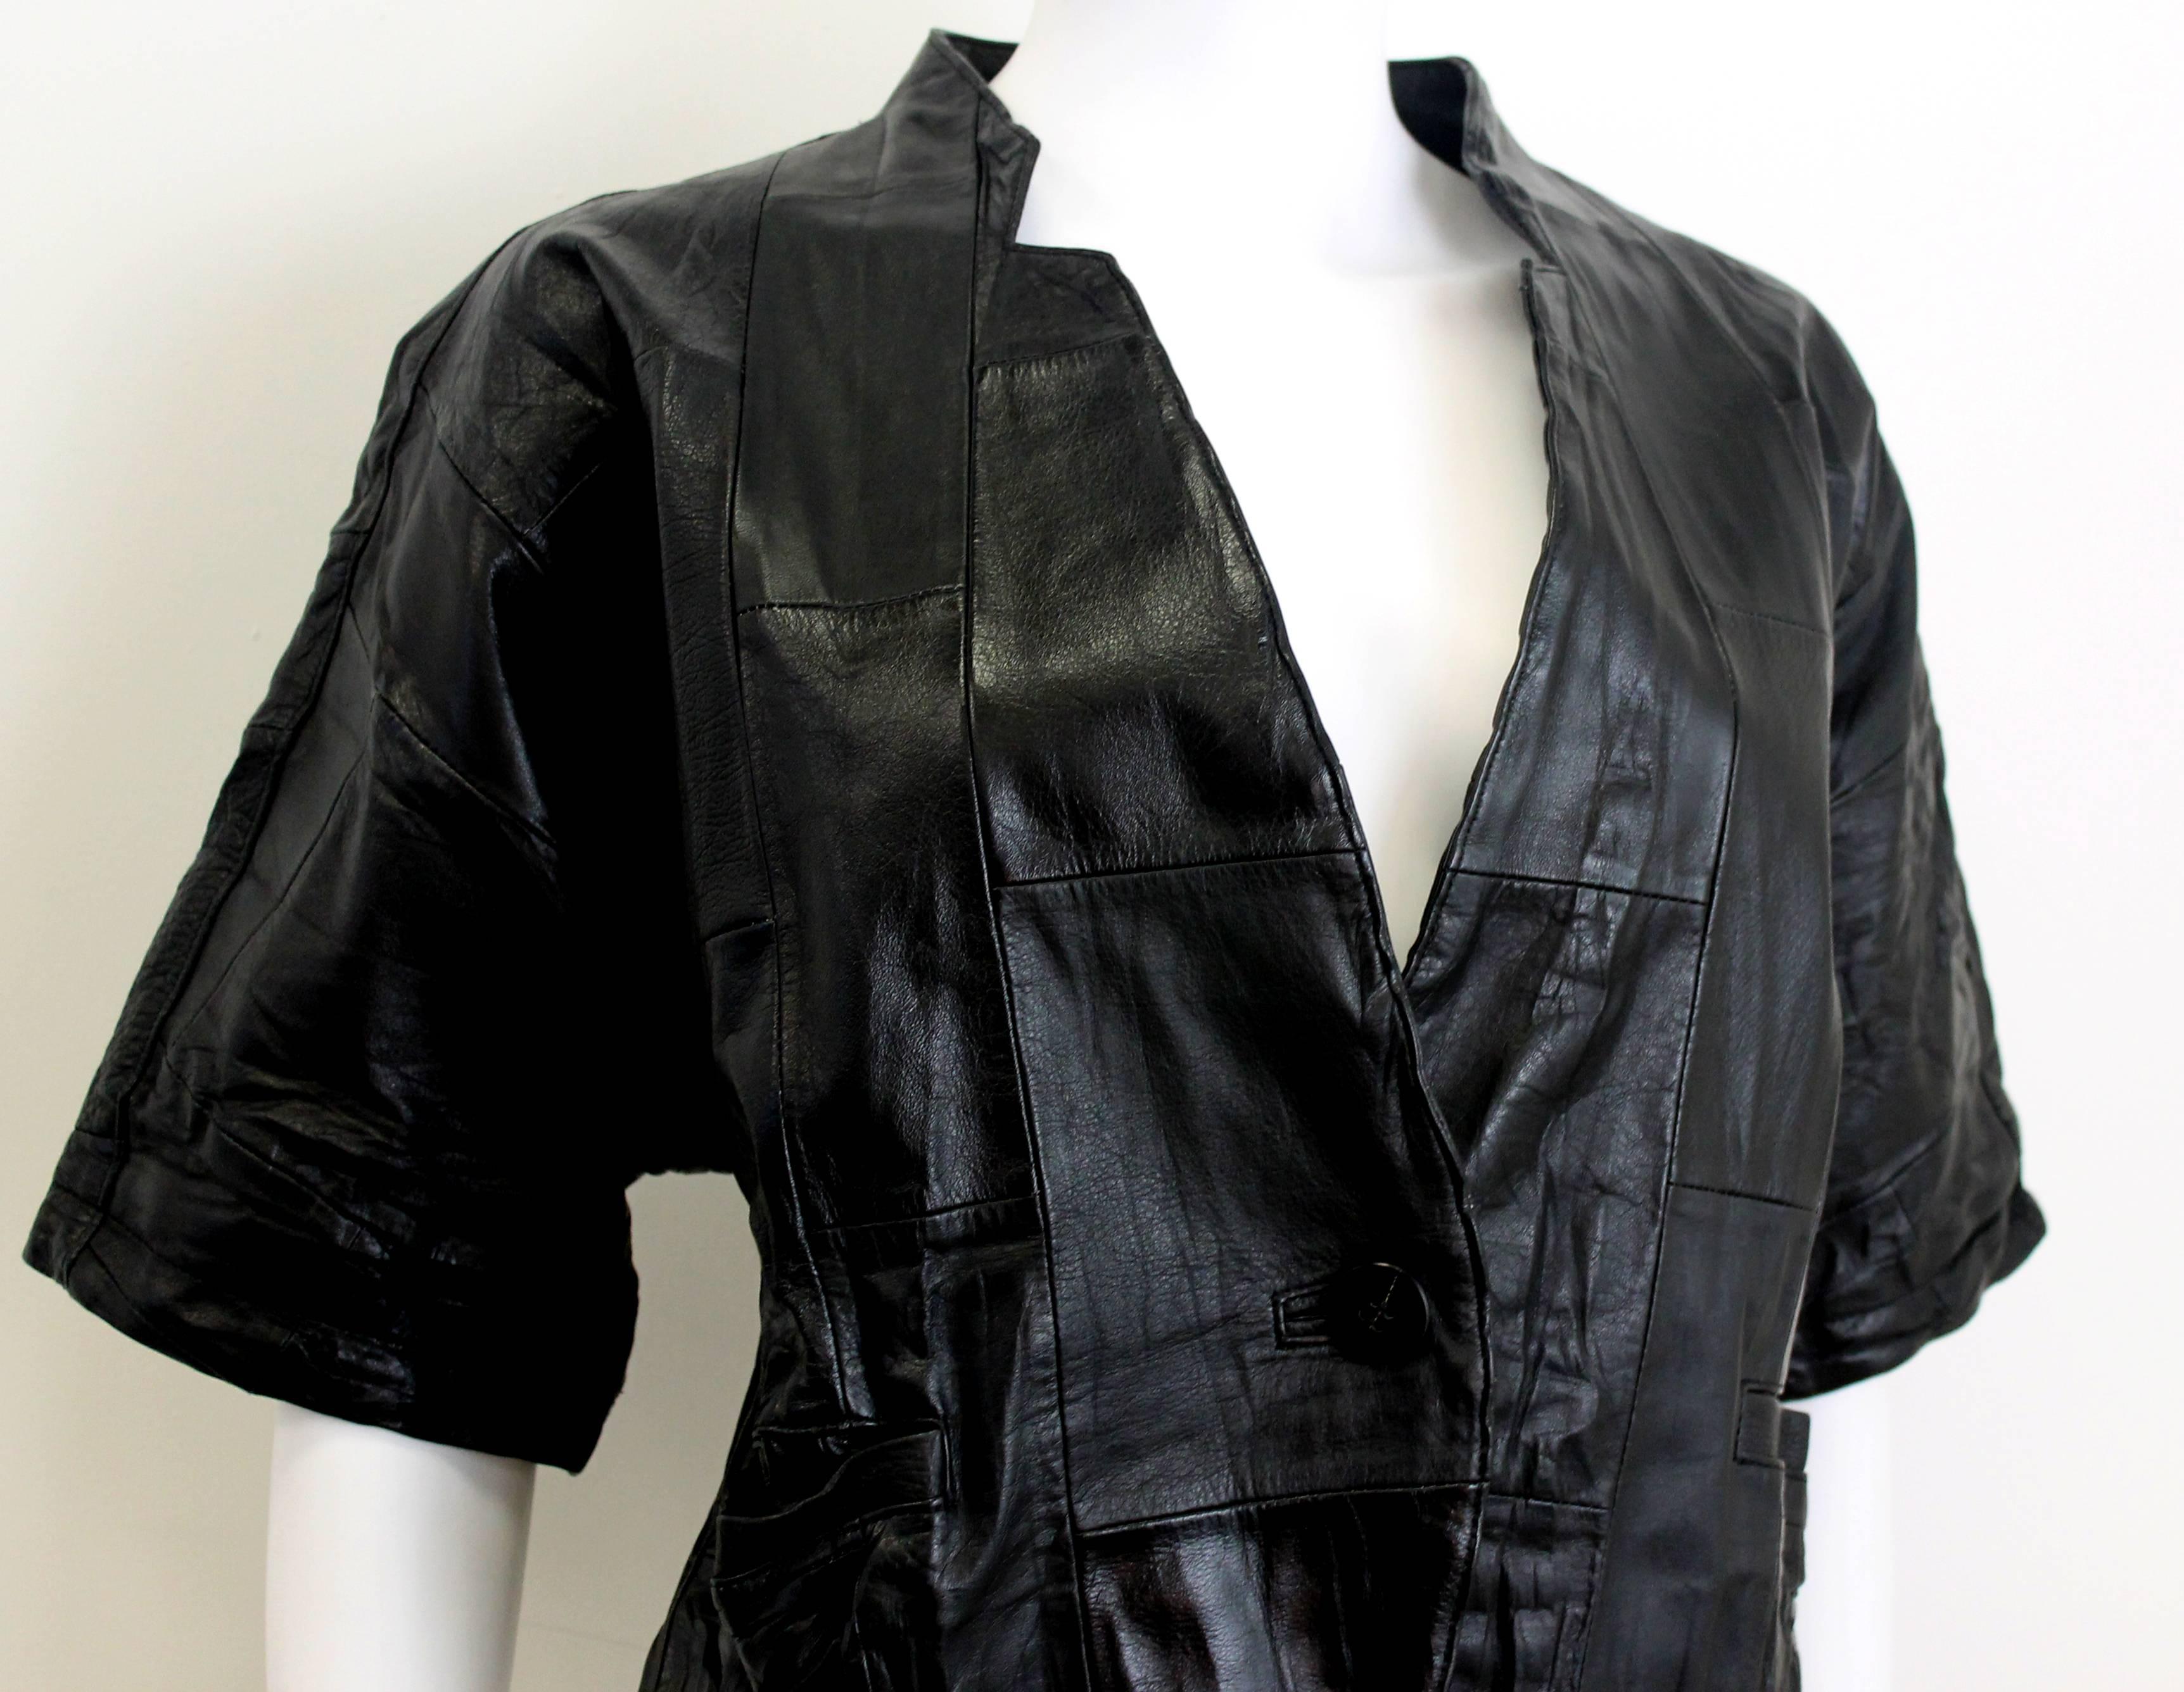 Issey Miyake black leather jacket with patchwork jacket. Features single button closure and an open neckline.